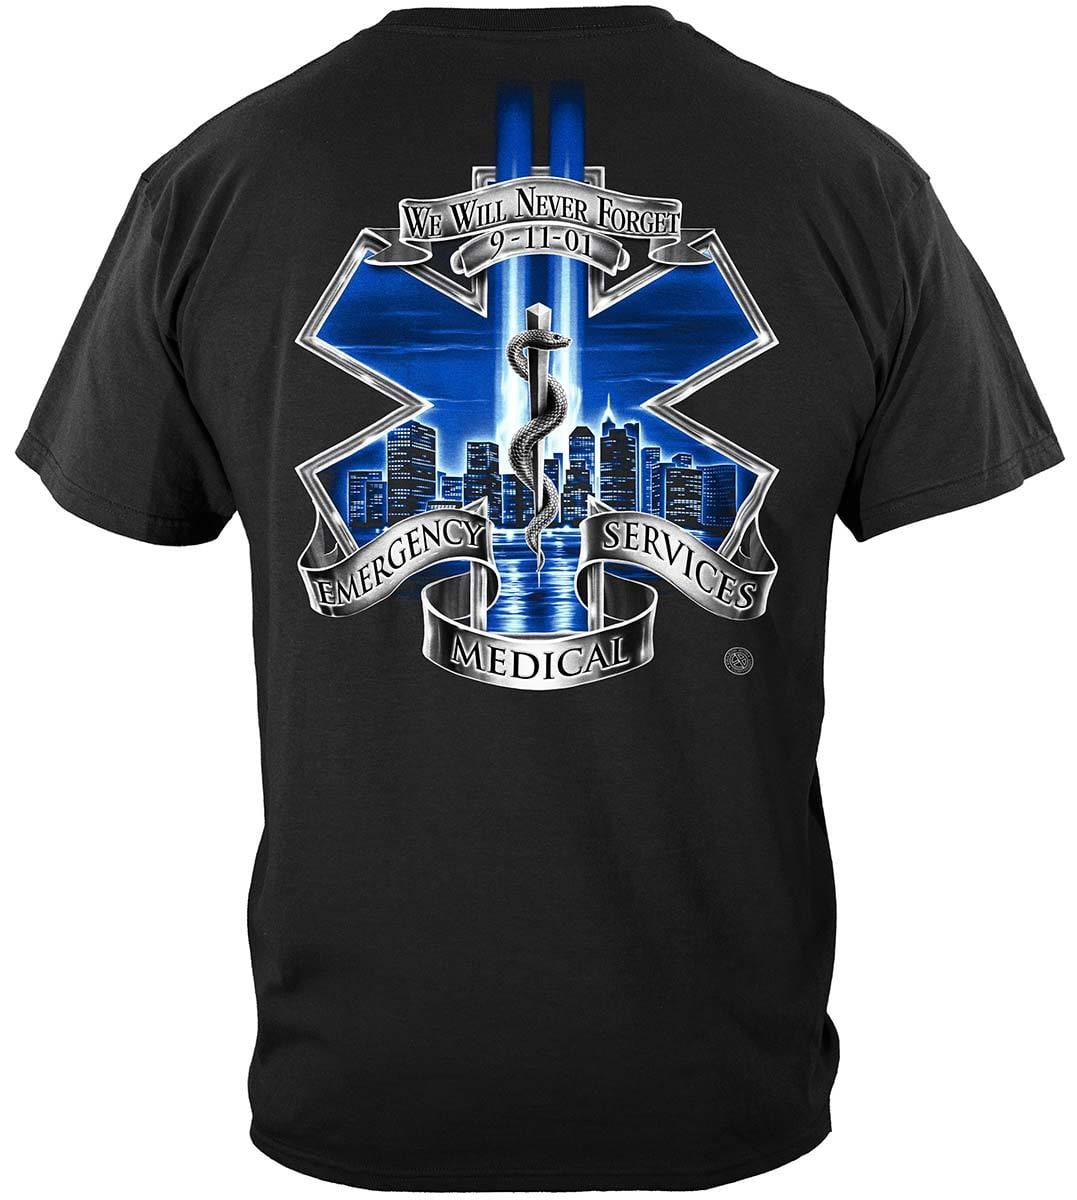 911 EMS Blue Skies We Will Never Forget Premium Long Sleeves